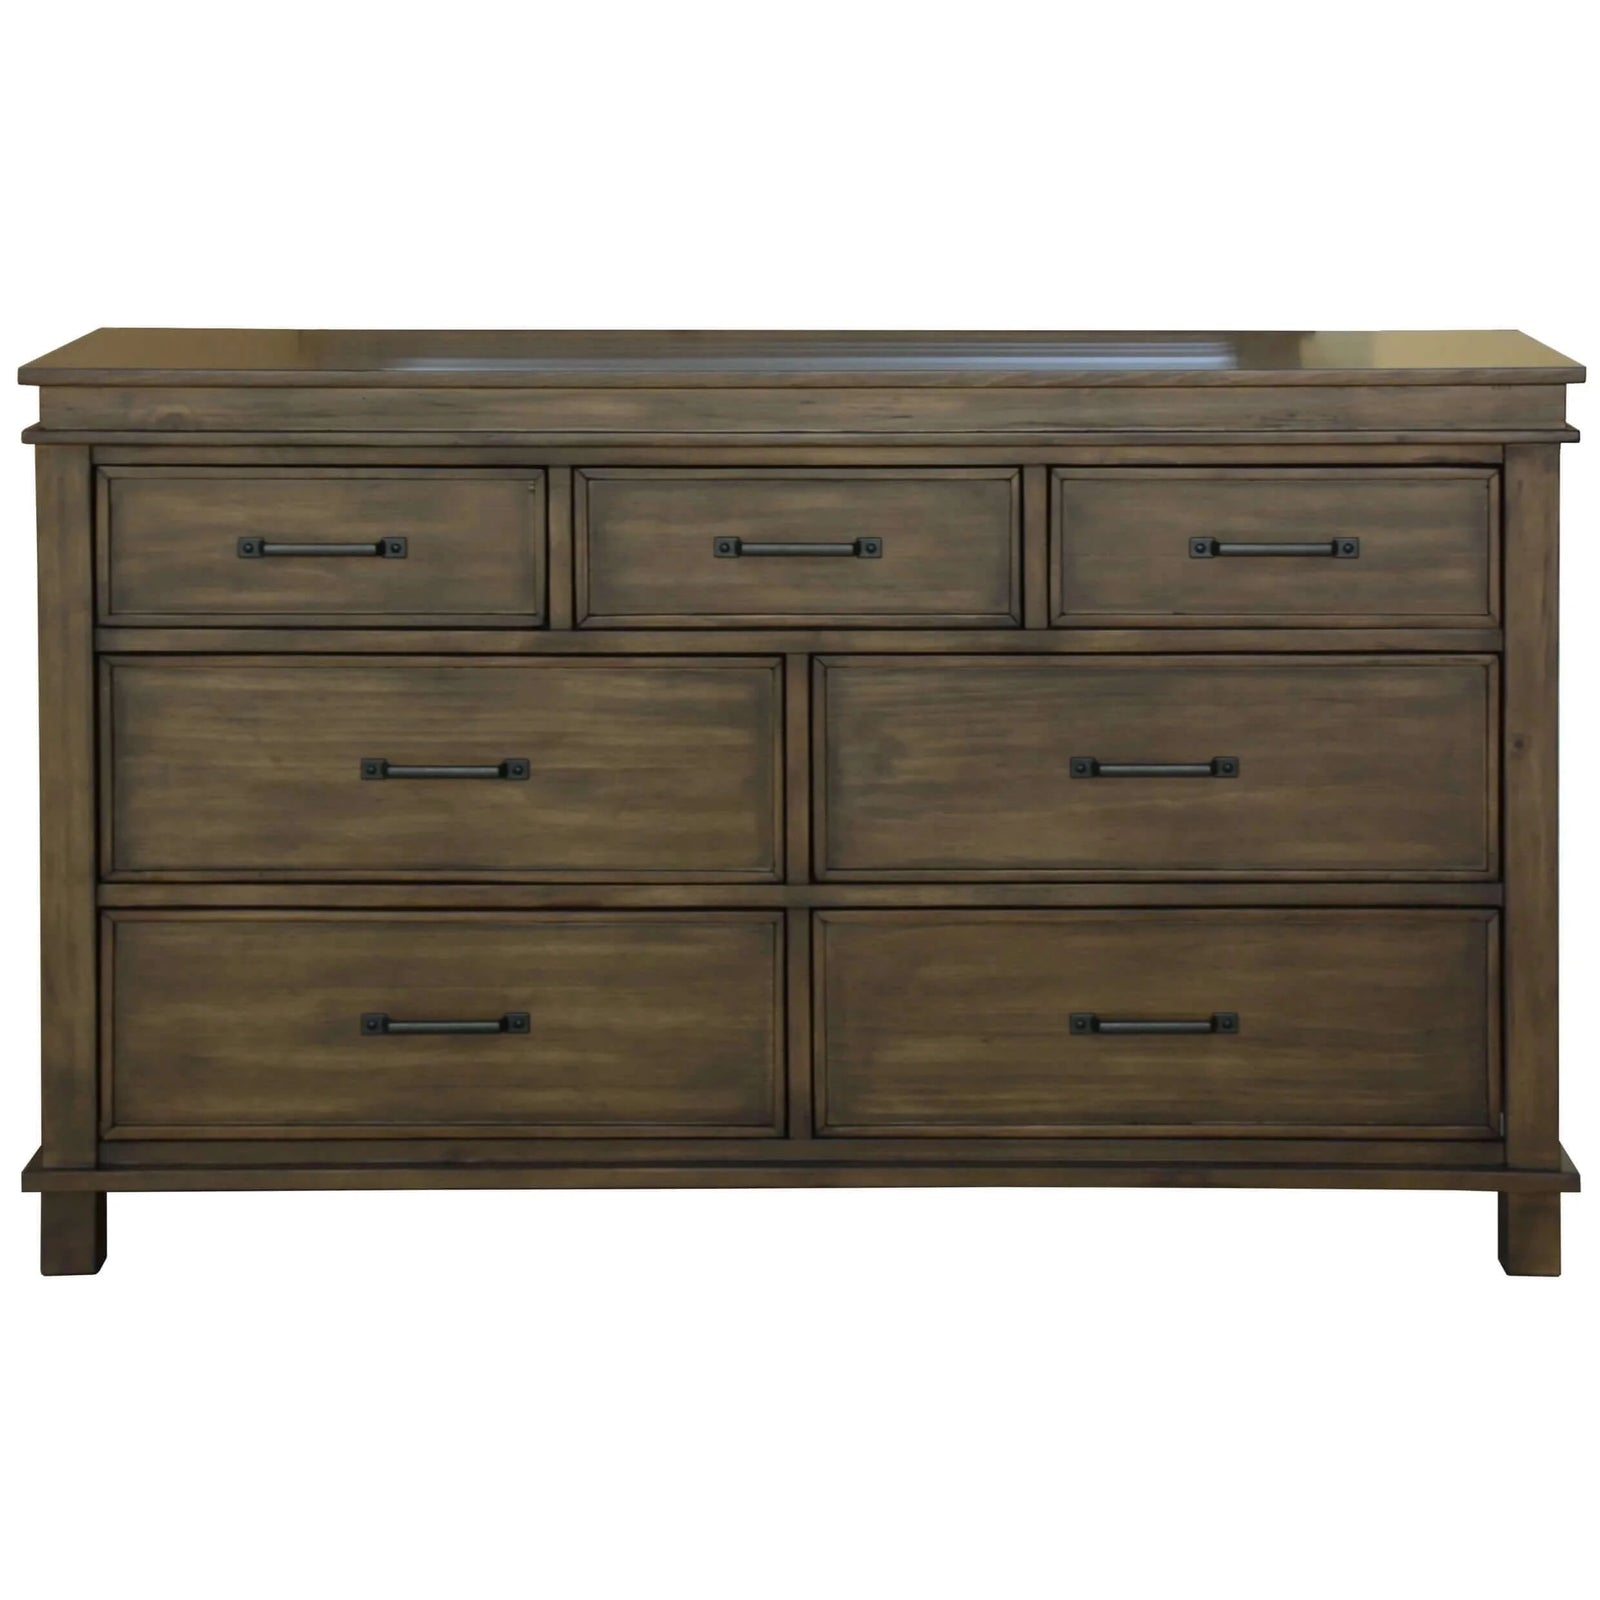 Buy lily dresser 7 chest of drawers solid wood tallboy storage cabinet - rustic grey - upinteriors-Upinteriors